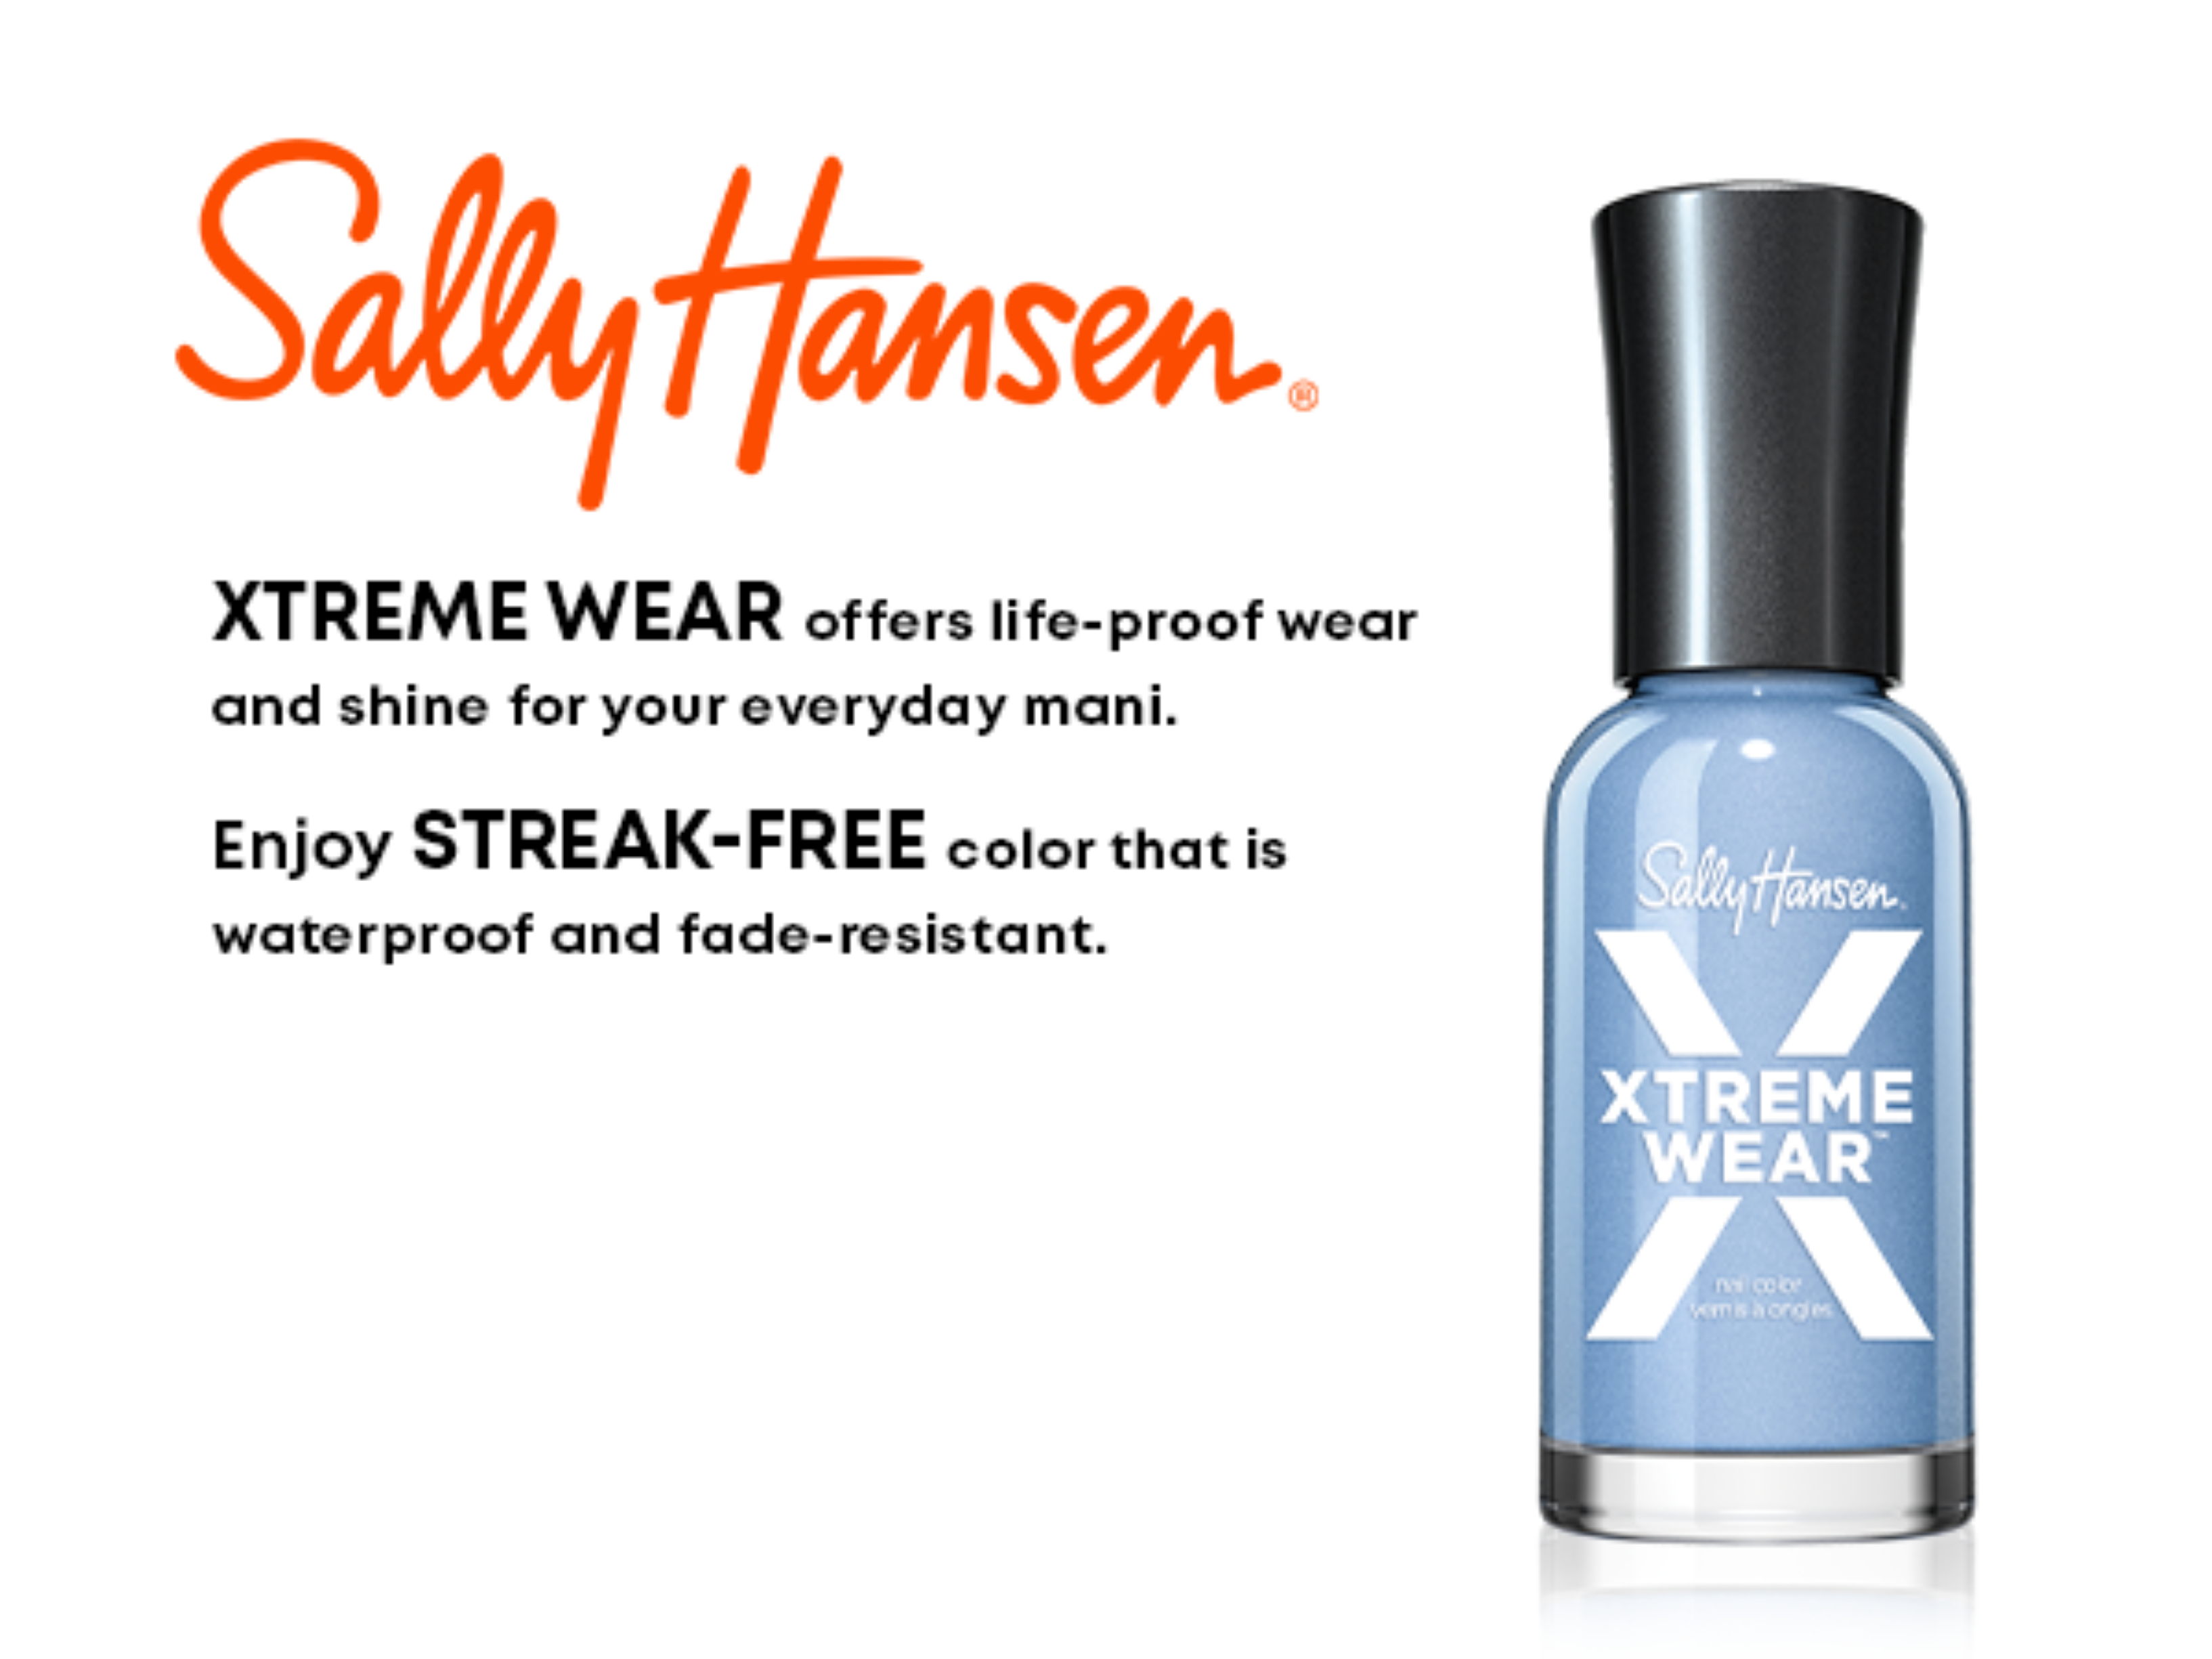 Sally Hansen Xtreme Wear Nail Polish, Pucker Up, 0.4 oz, Chip Resistant, Bold Color - image 5 of 14